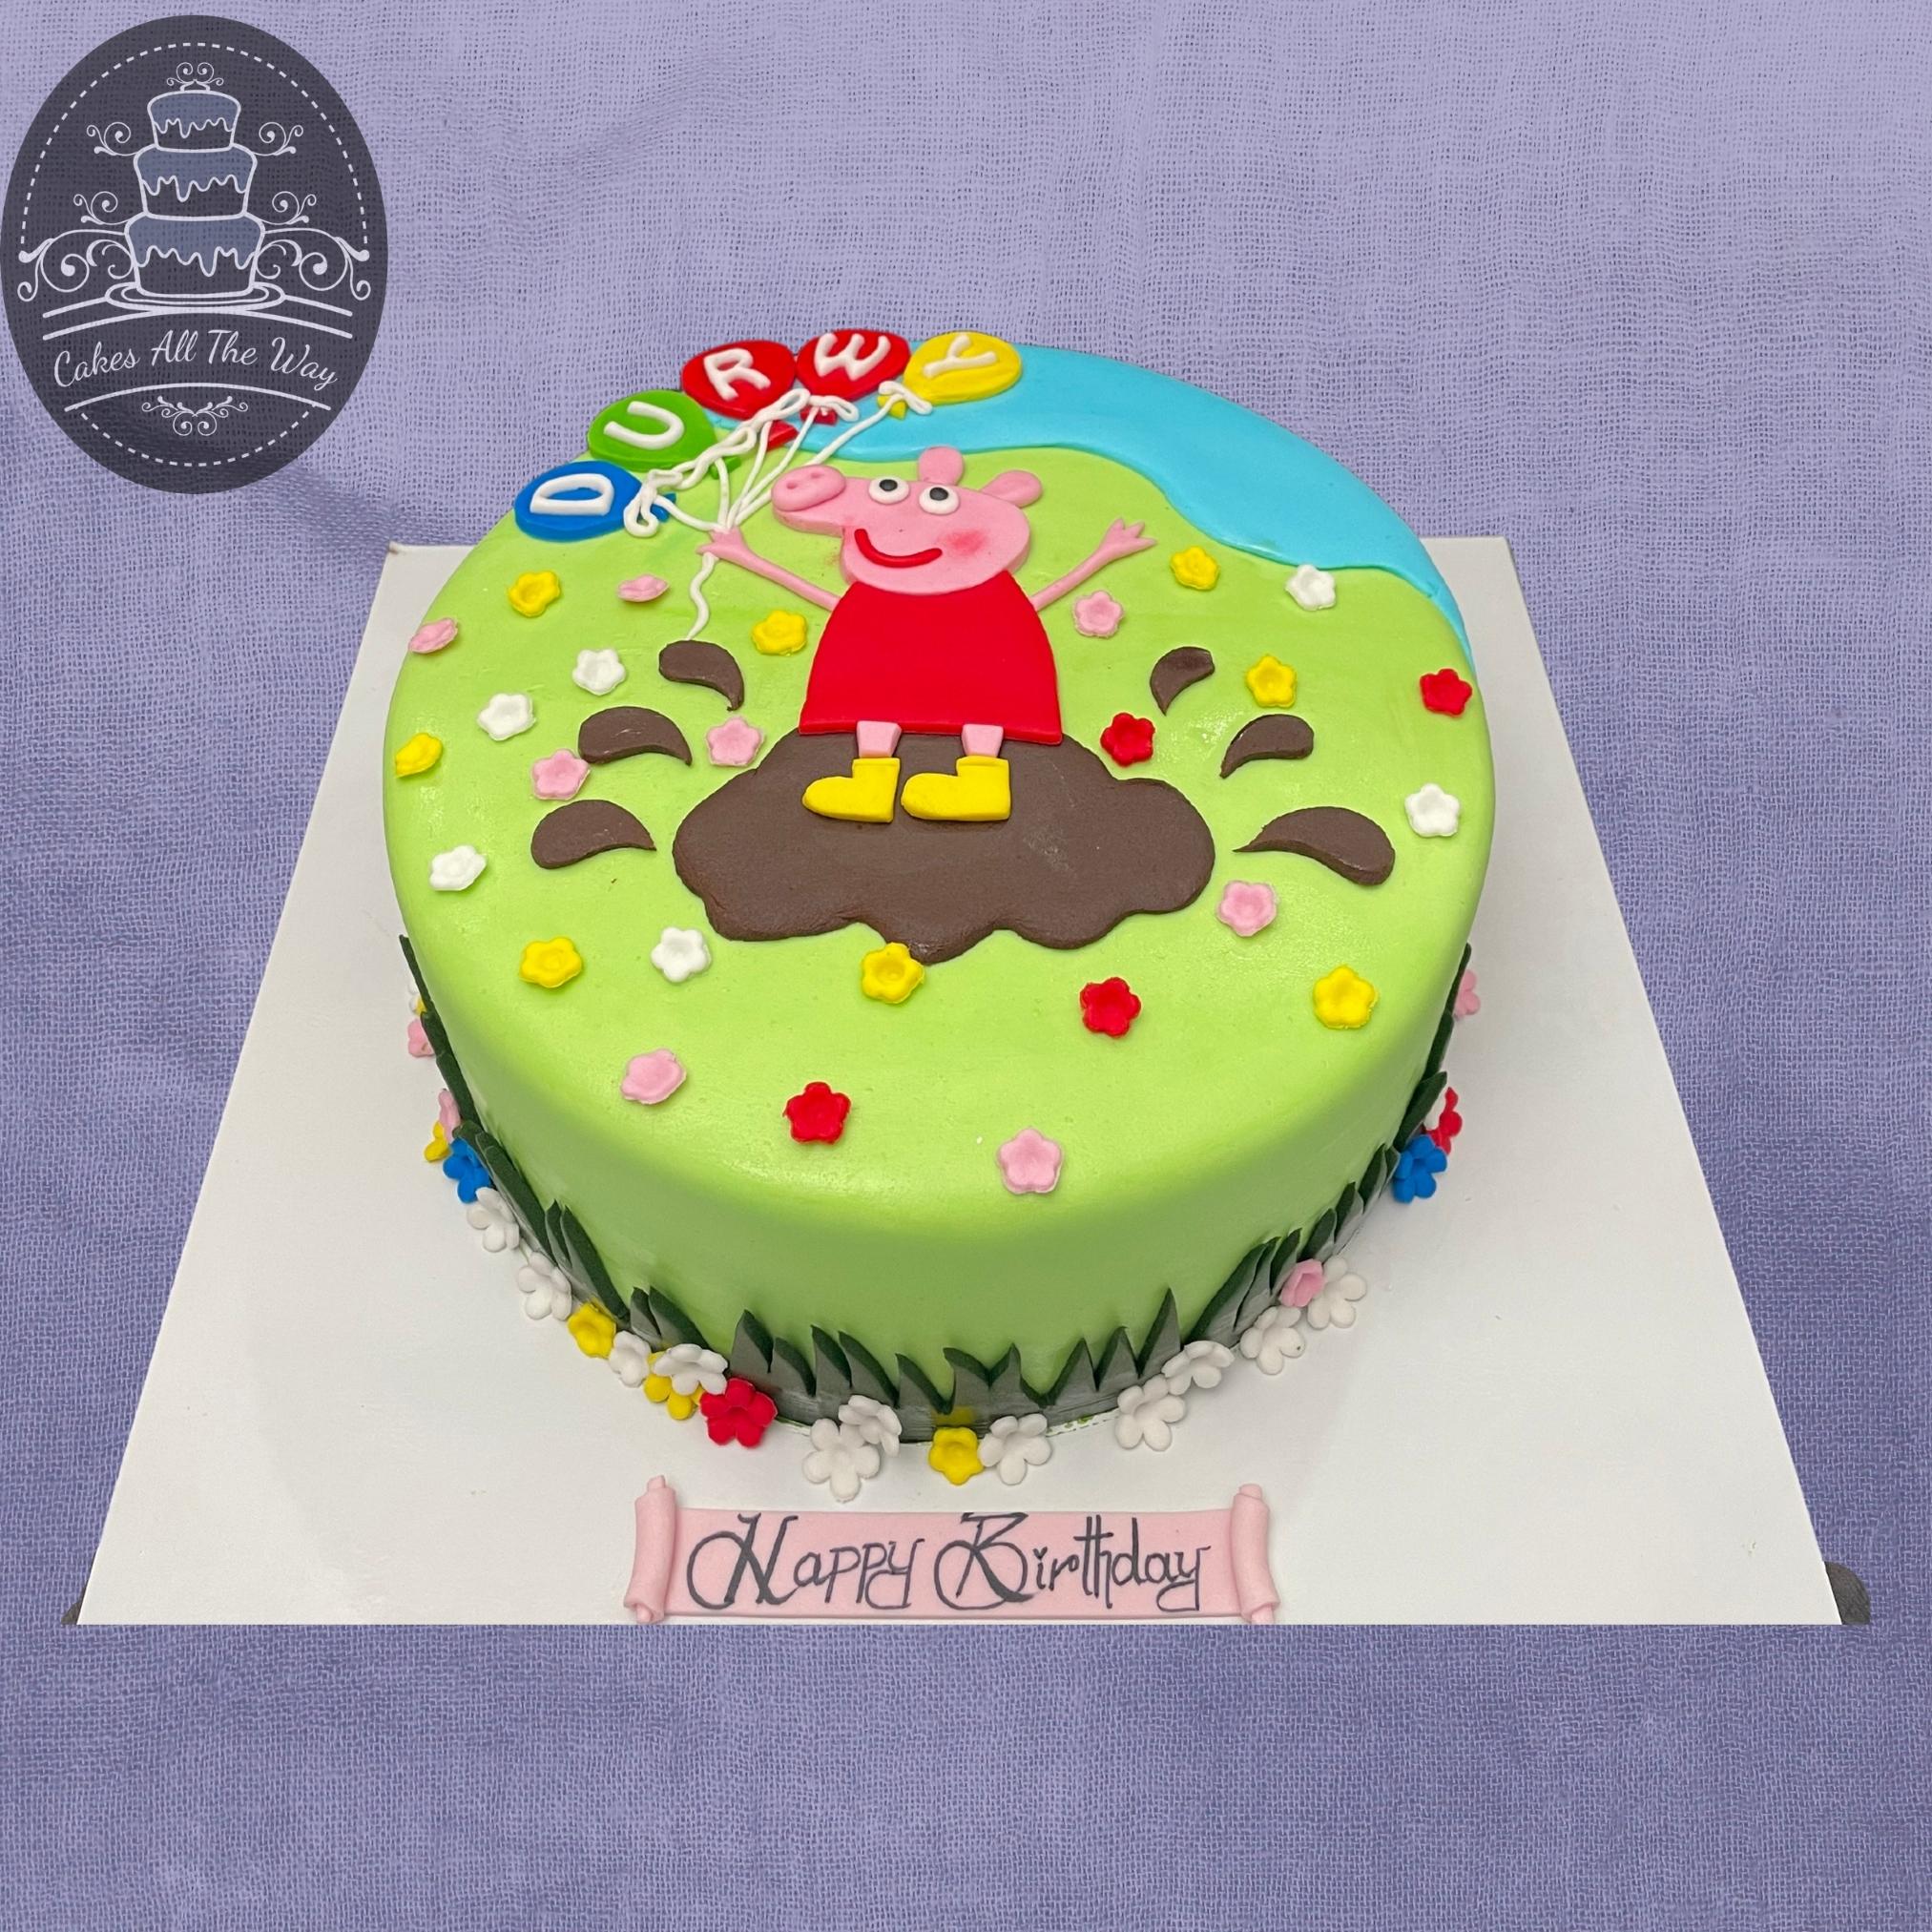 Peppa Pig Cake - Order Online Peppa Pig cake, Check Images, Price Near You